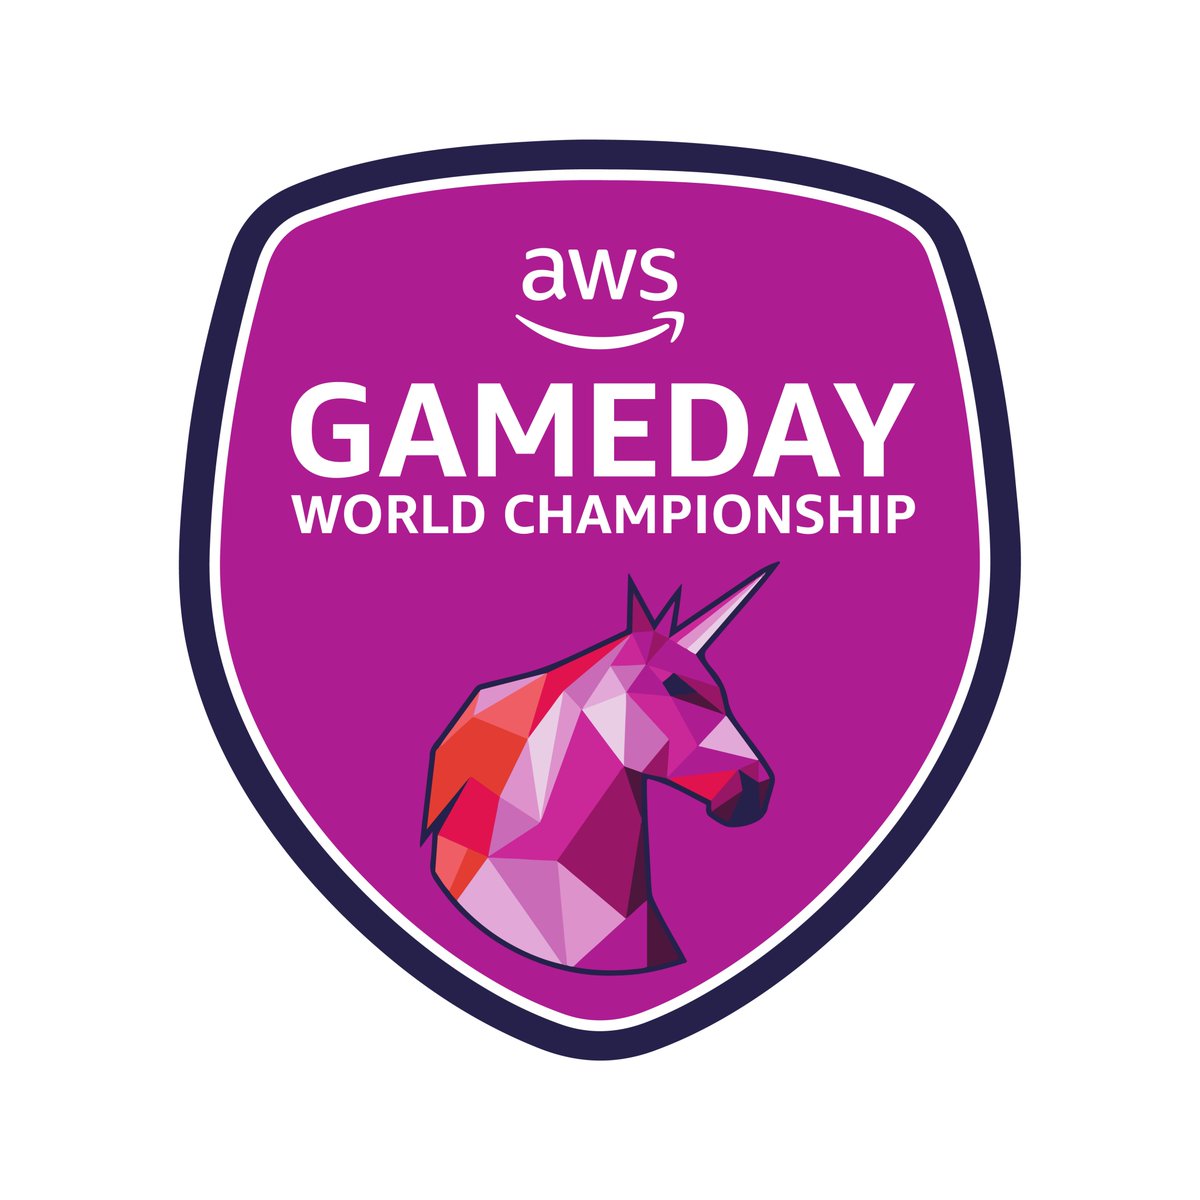 Developers: Get our unicorns 🦄 🦄 back to work and test your skills at #AWSGameDay, for a shot at the World Championship 🏆. All skill levels are welcome; register at pages.awscloud.com/GLOBAL-gamedev…